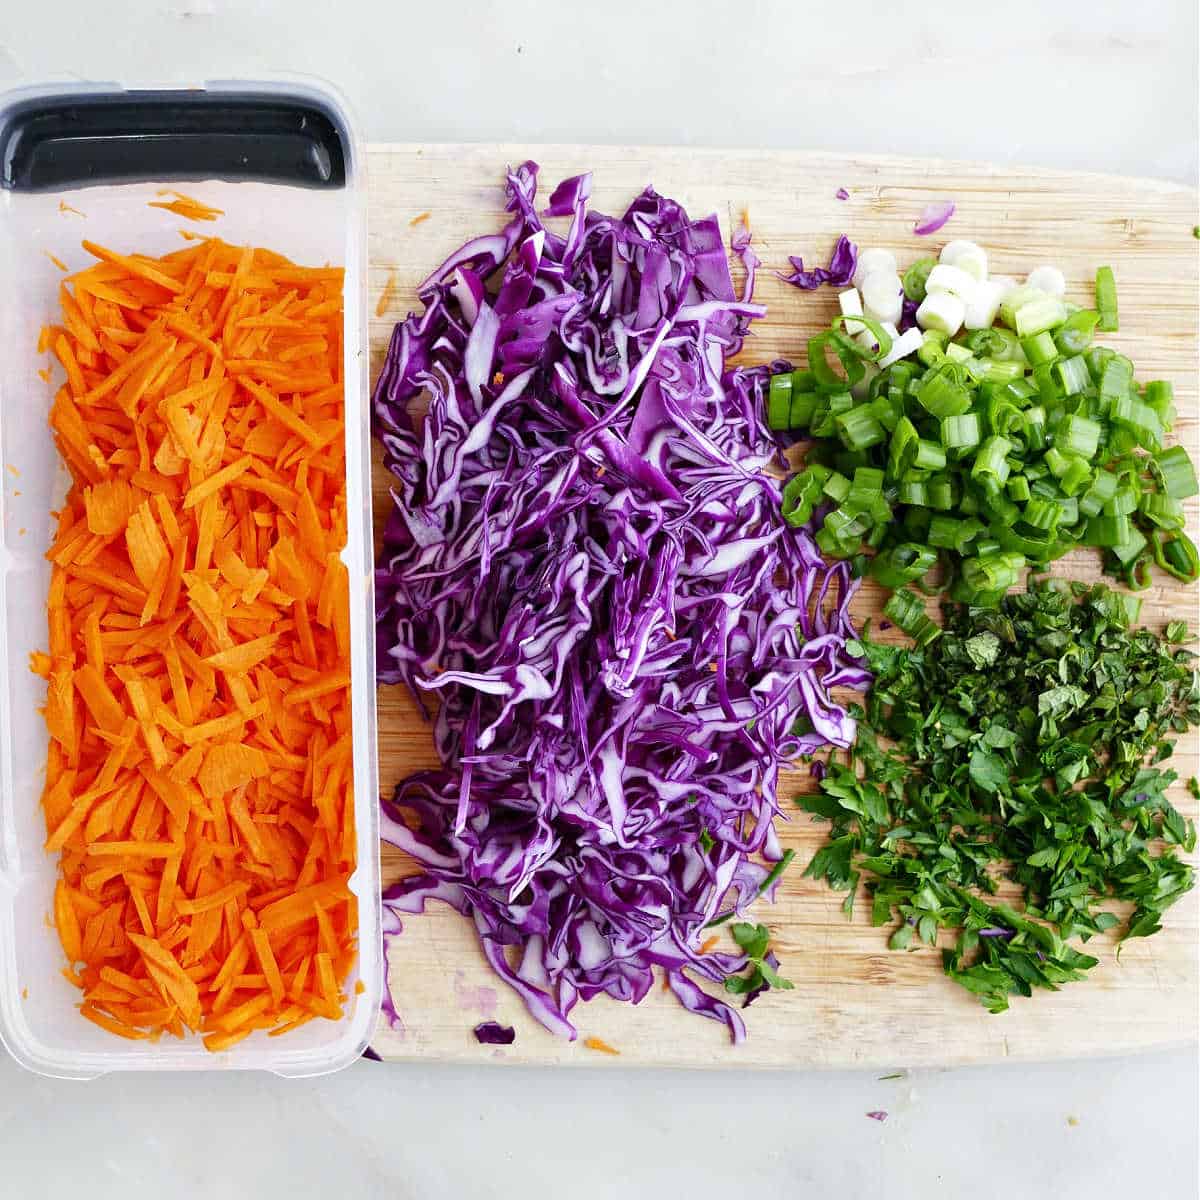 Chopped ingredients for the simple cabbage carrot slaw on a cutting board.